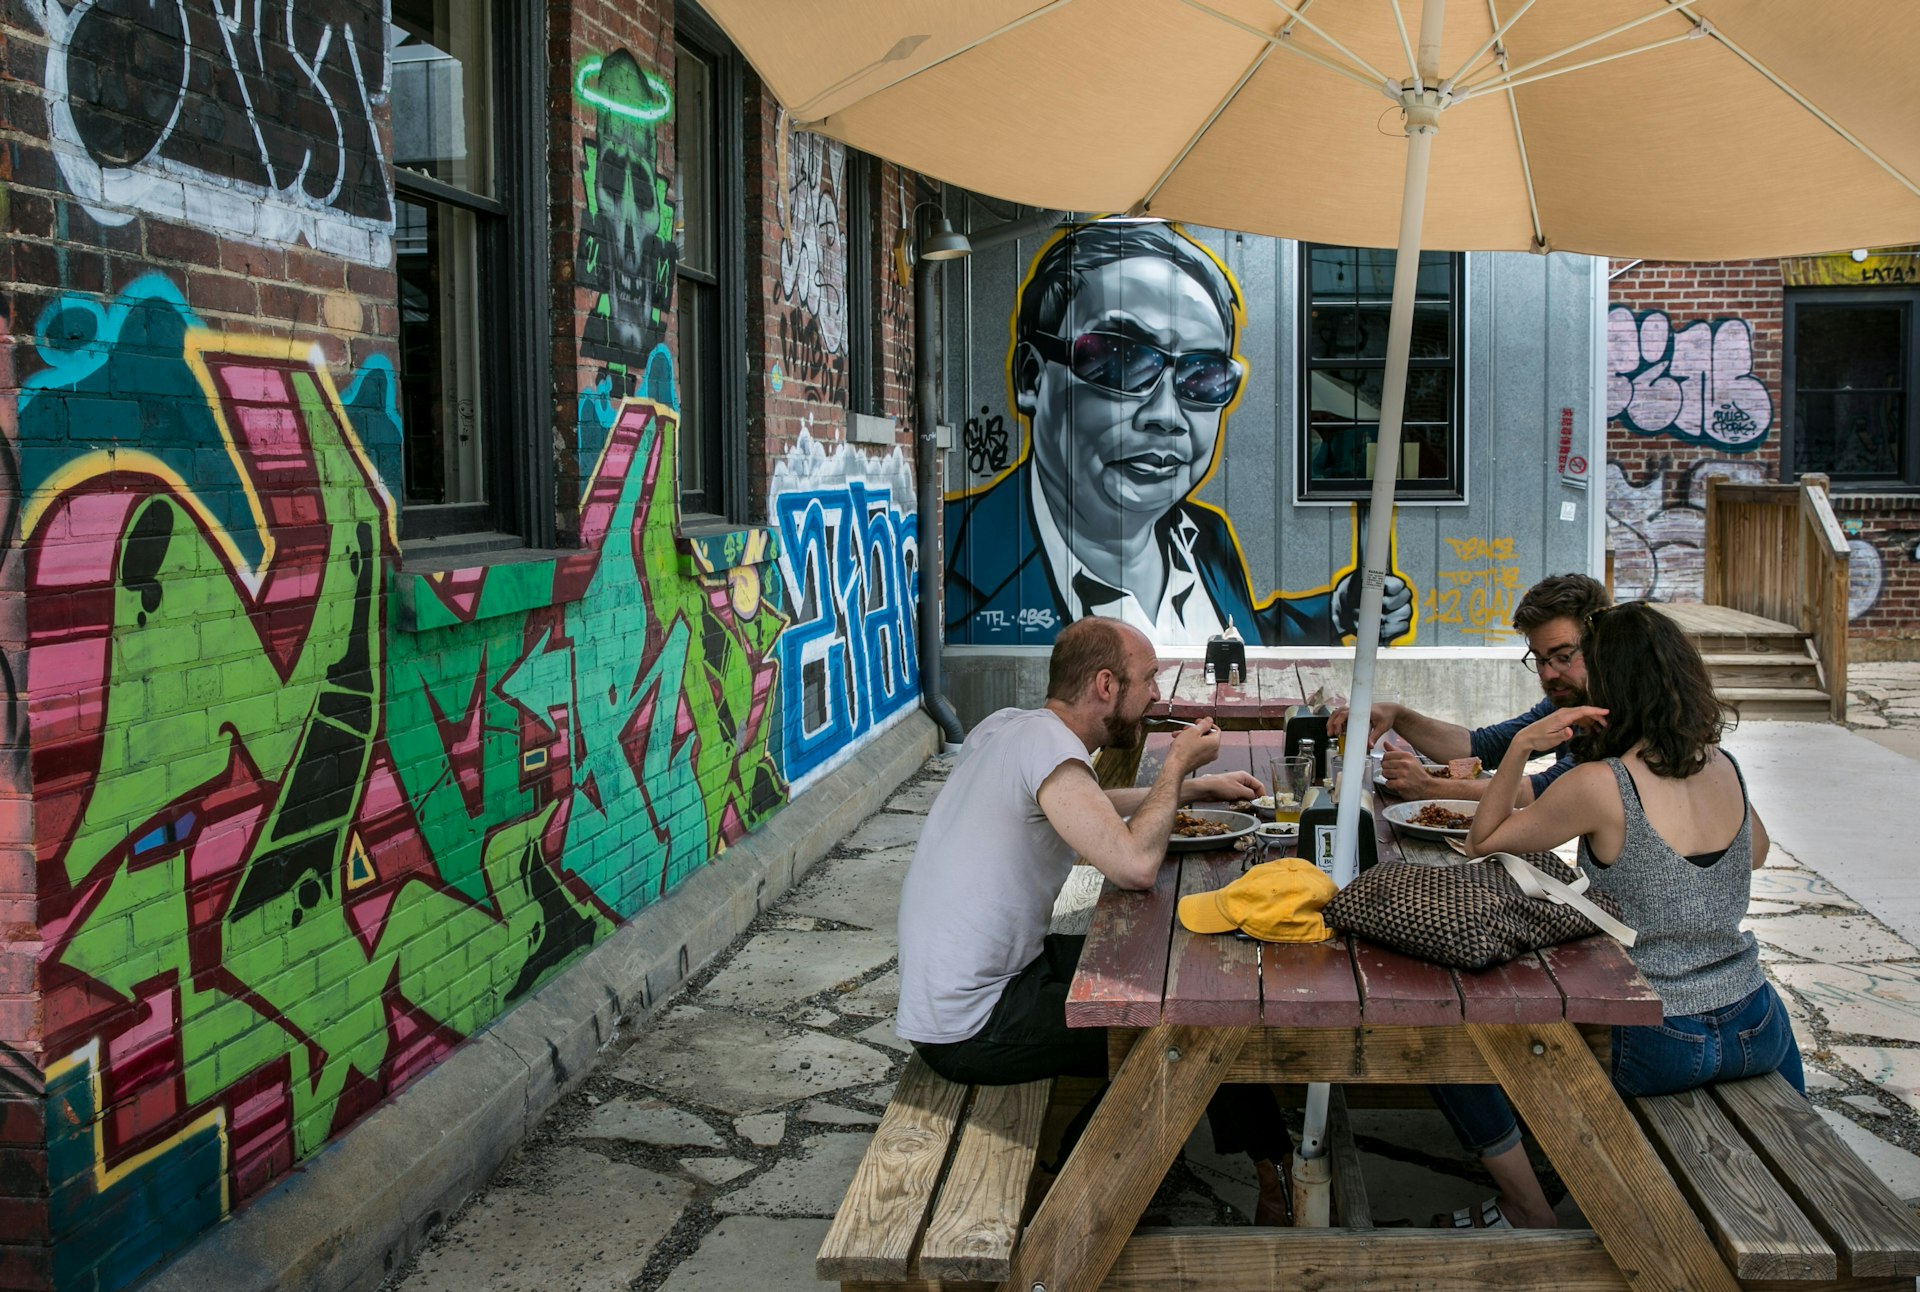 People enjoy the outside patio at 12 Bones Smokehouse barbecue restaurant in the River Arts District, Asheville, North Carolina, USA